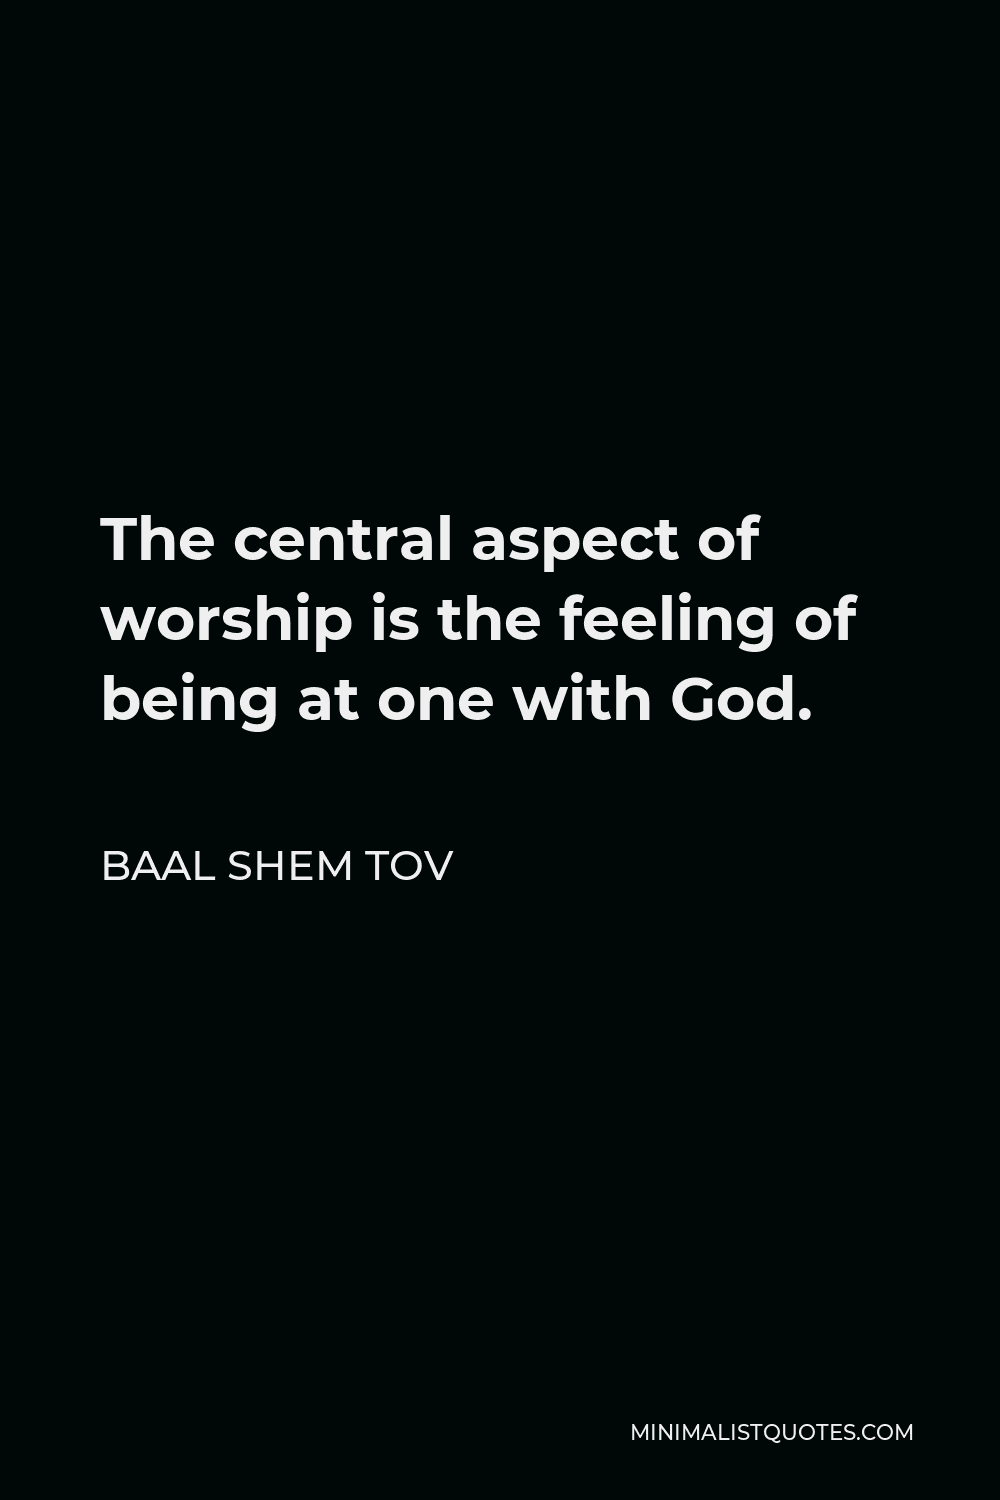 Baal Shem Tov Quote - The central aspect of worship is the feeling of being at one with God.